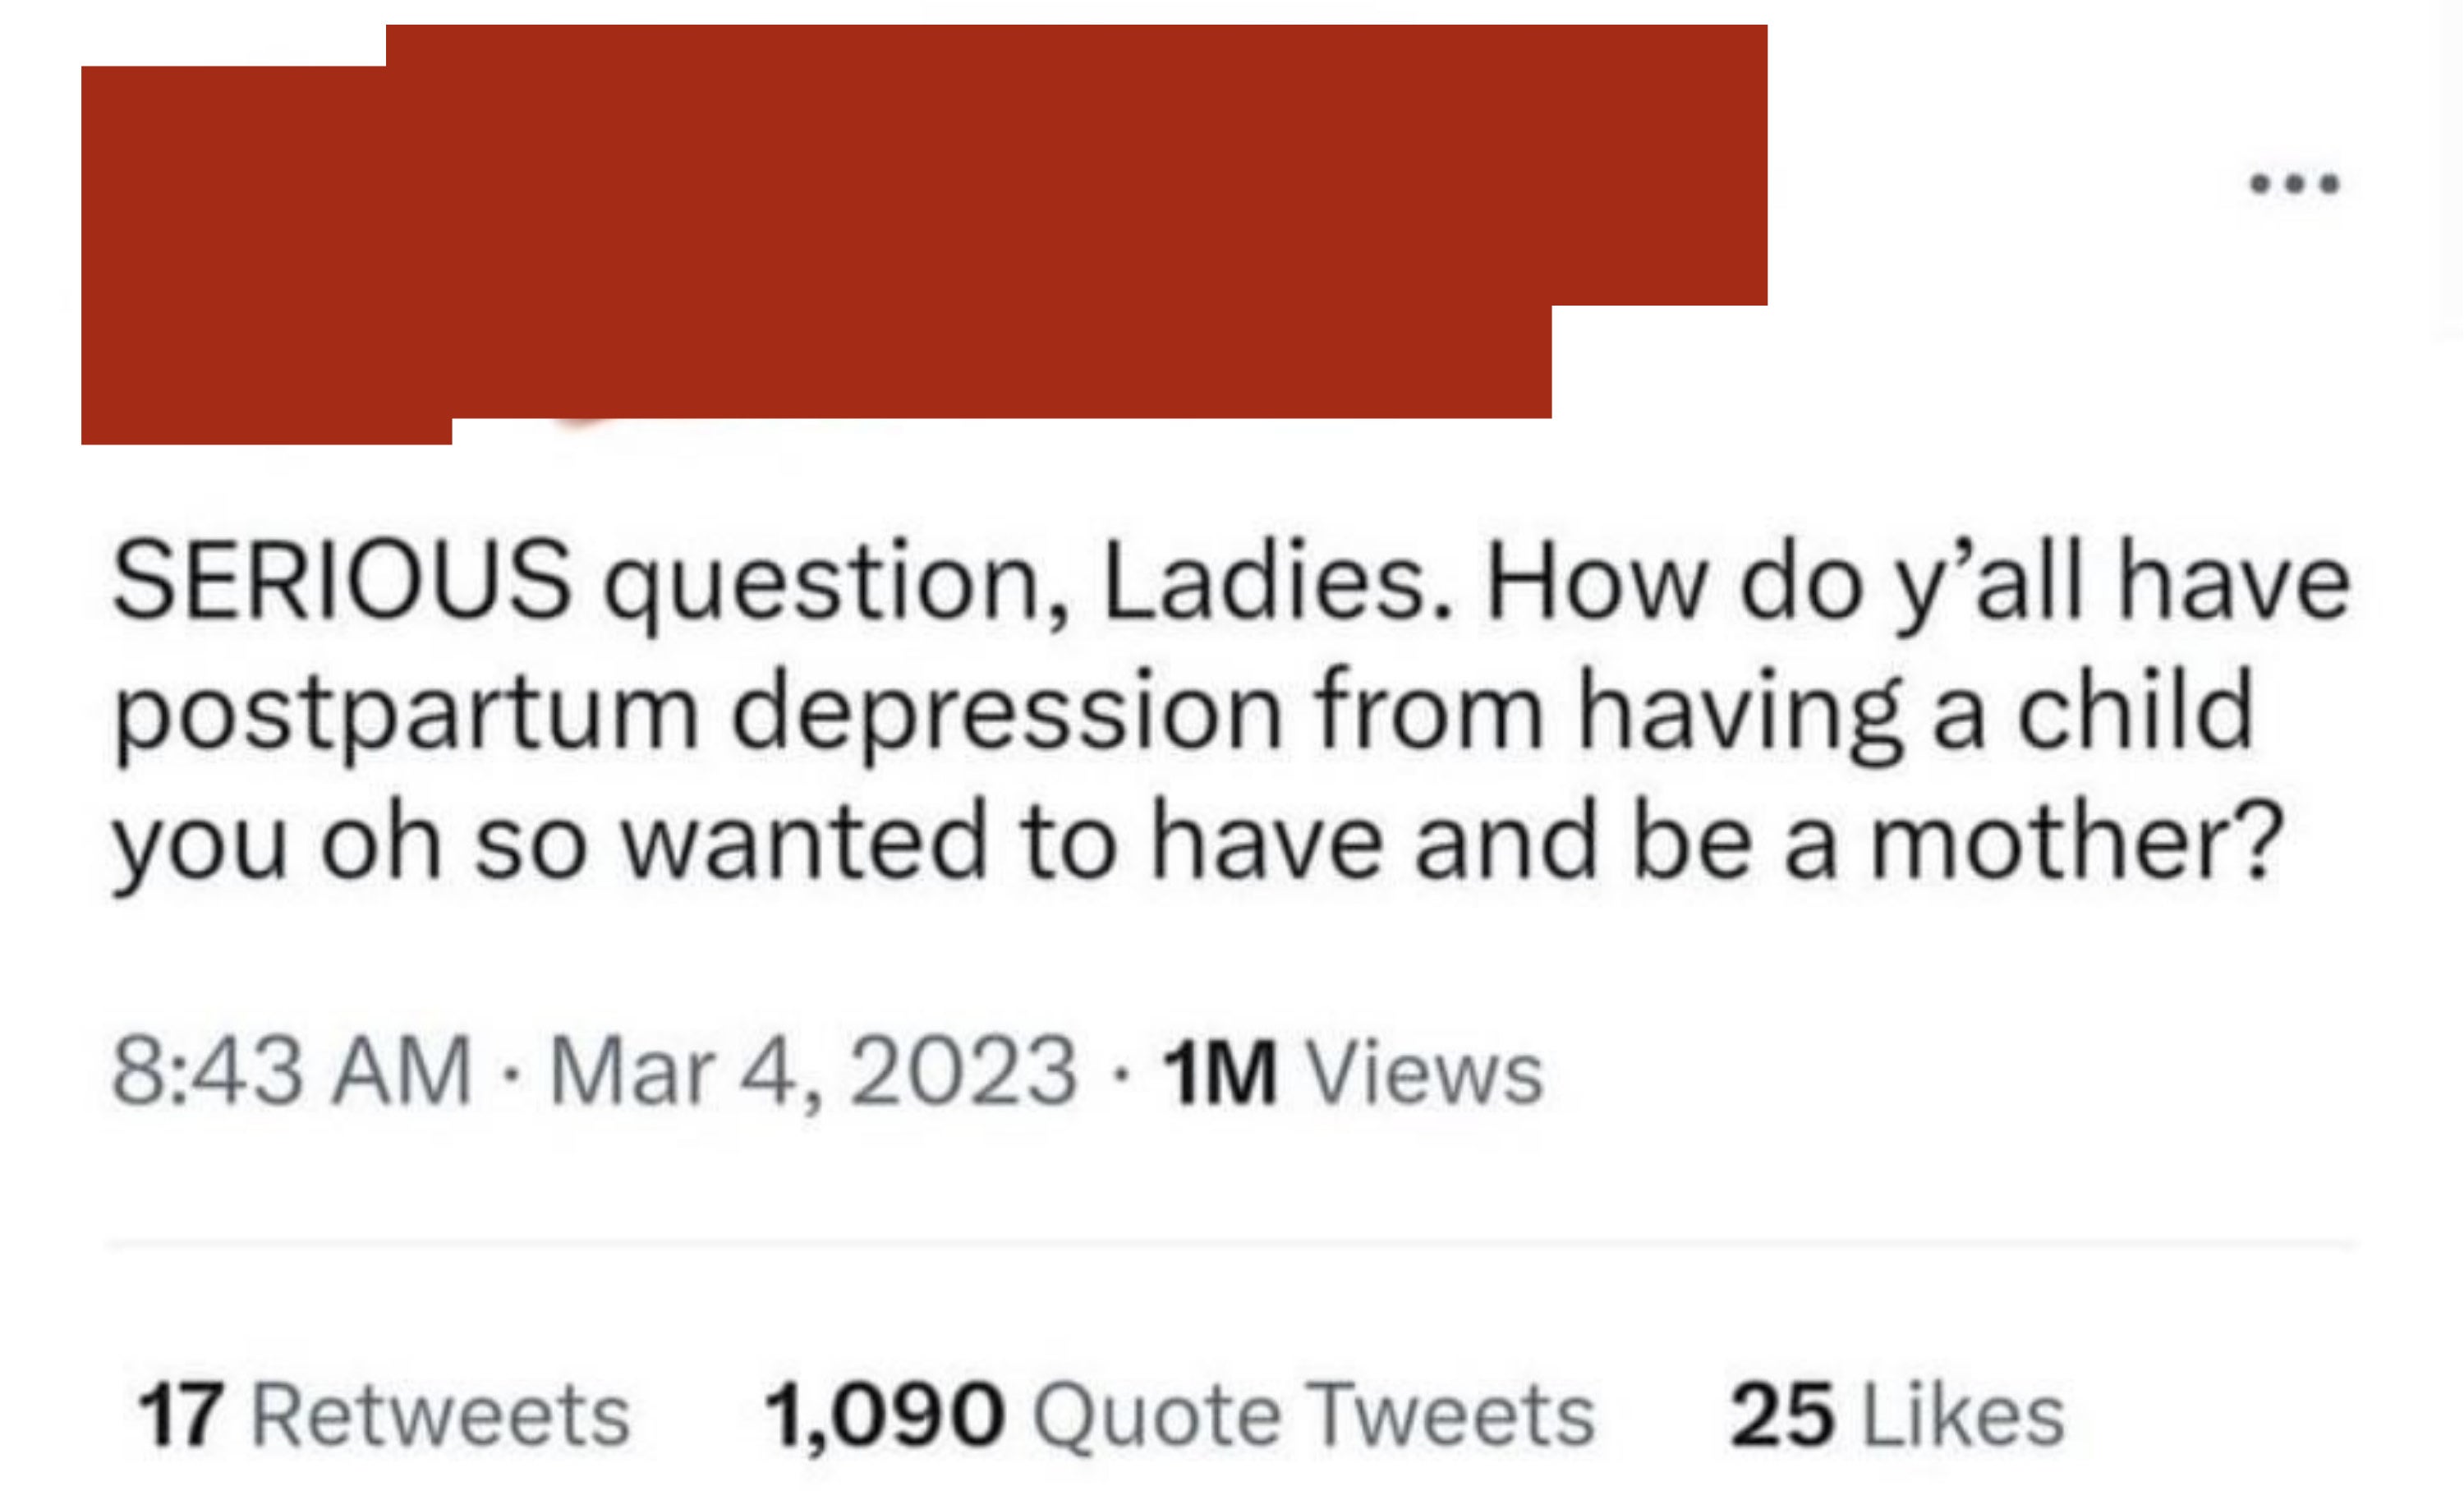 &quot;SERIOUS question, ladies: How do y&#x27;all have postpartum depression from having a child you so so wanted to have and be a mother?&quot;